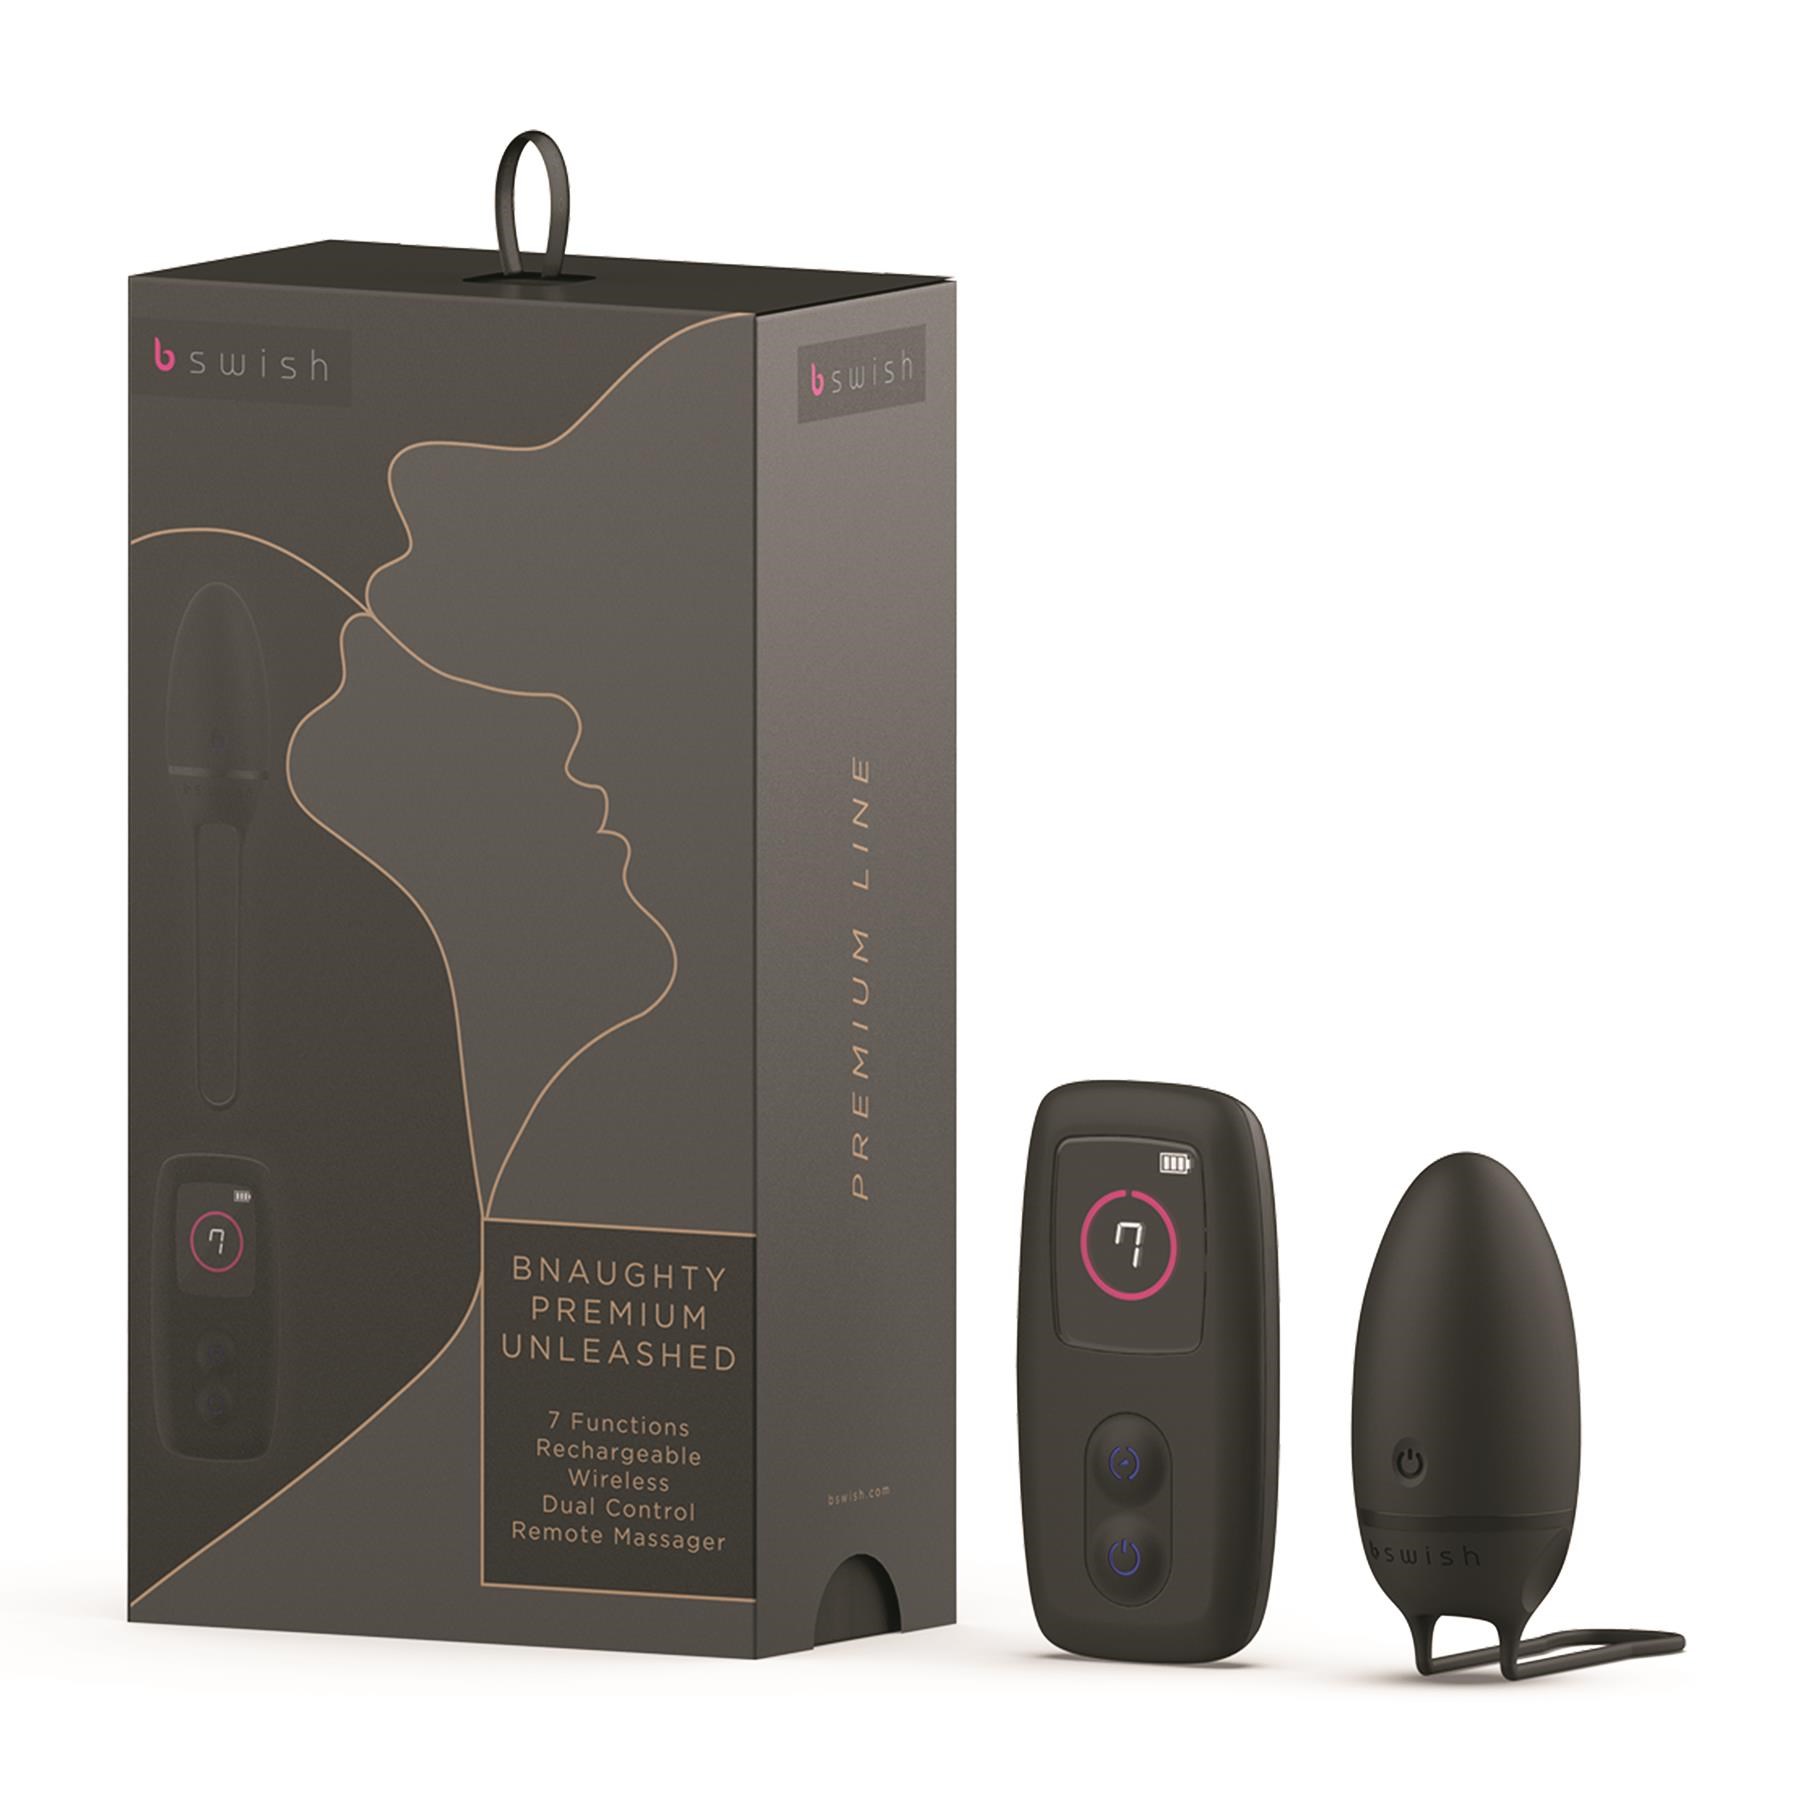 BSwish BNaughty Premium Unleashed Remote Control Bullet - Product and Packaging